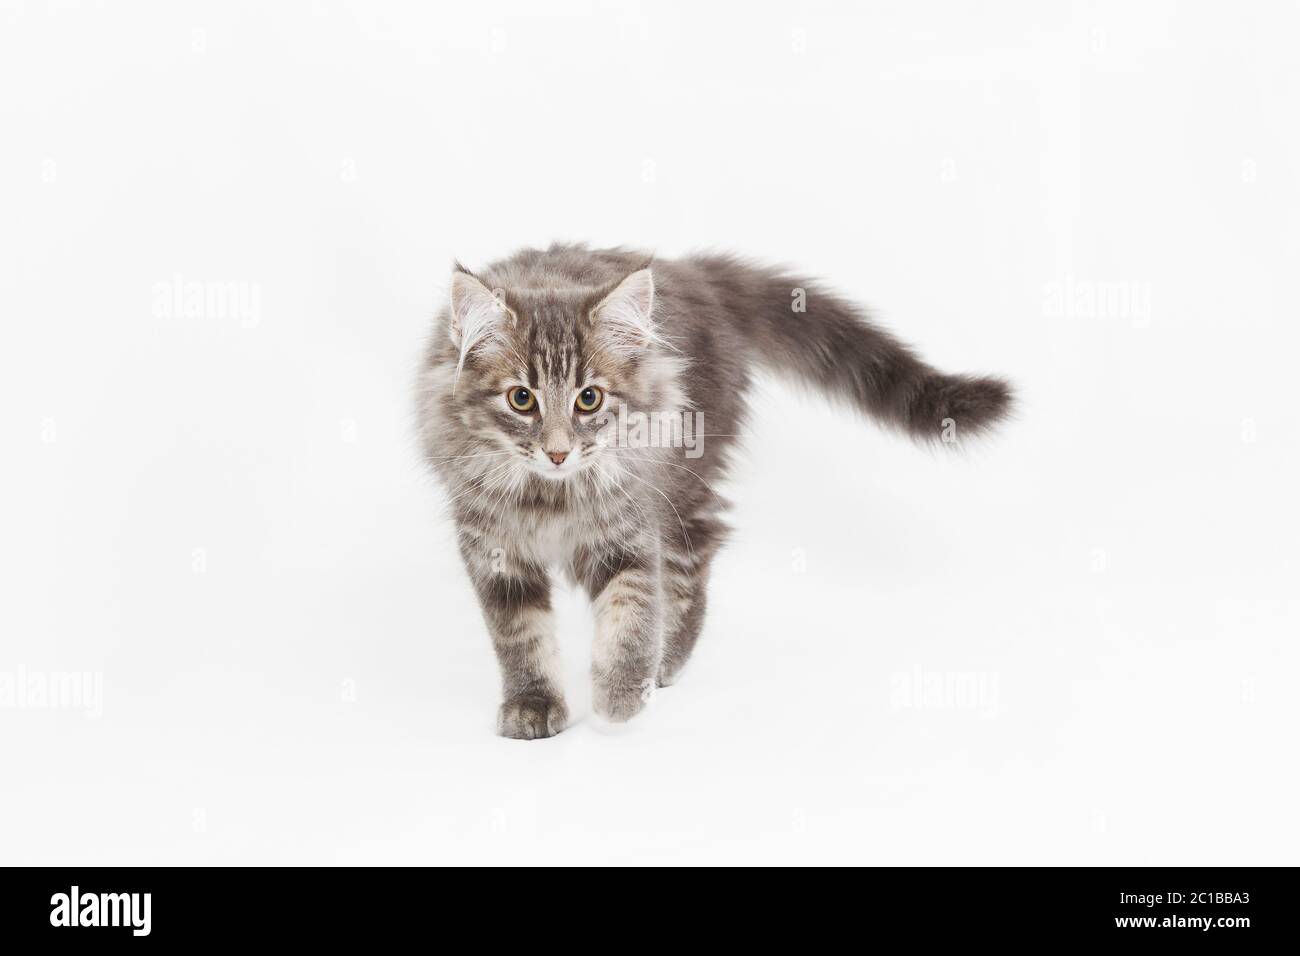 Studio portrait of a grey cat with luxuriant thick grey fur, on a white background Stock Photo